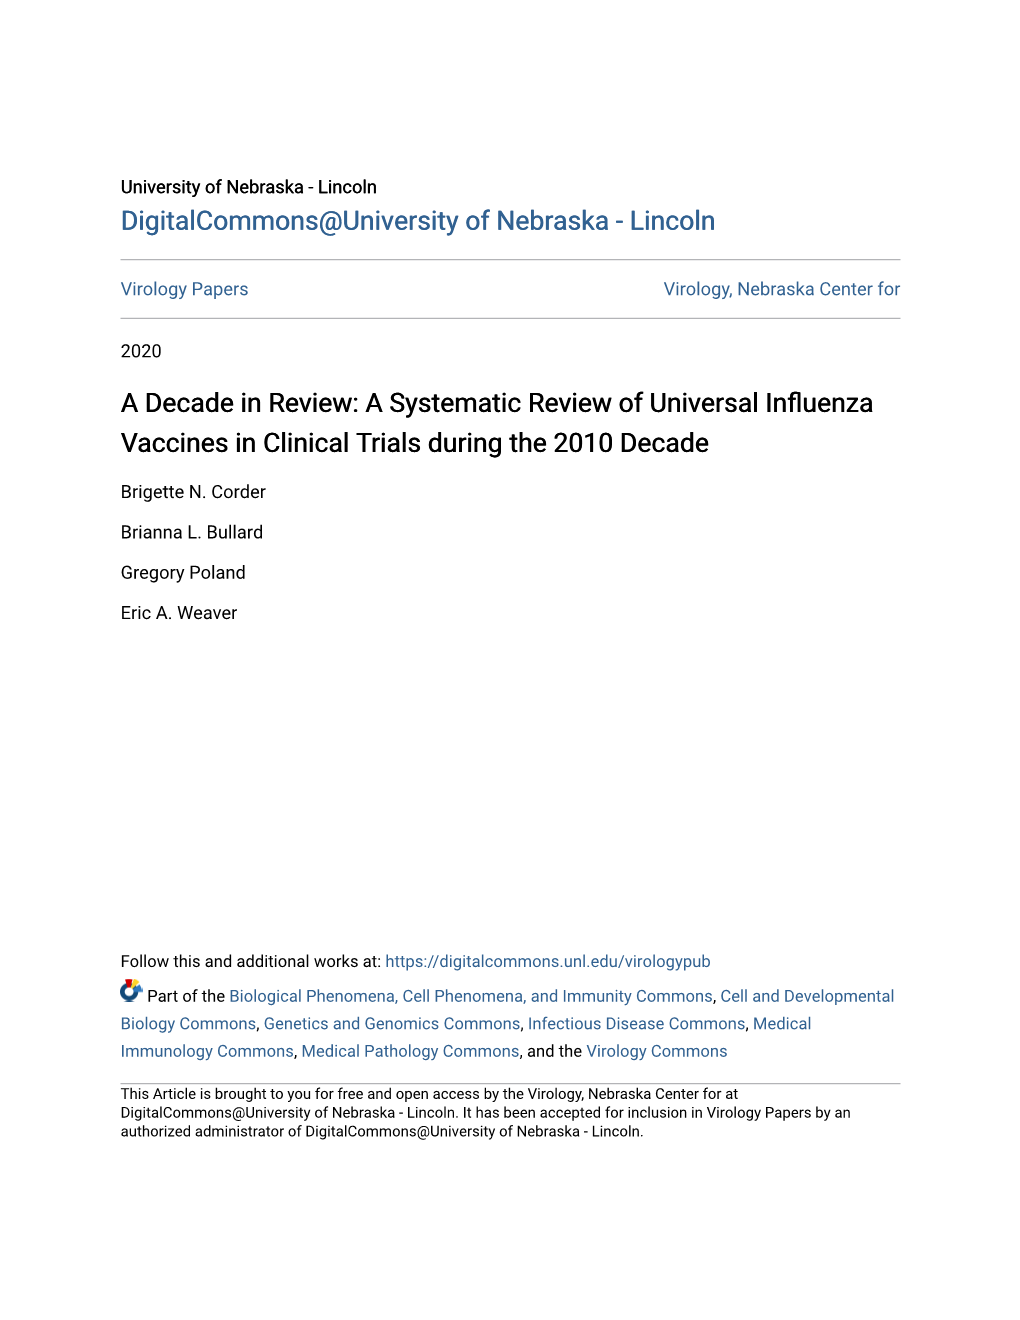 A Decade in Review: a Systematic Review of Universal Influenza Vaccines in Clinical Trials During the 2010 Decade